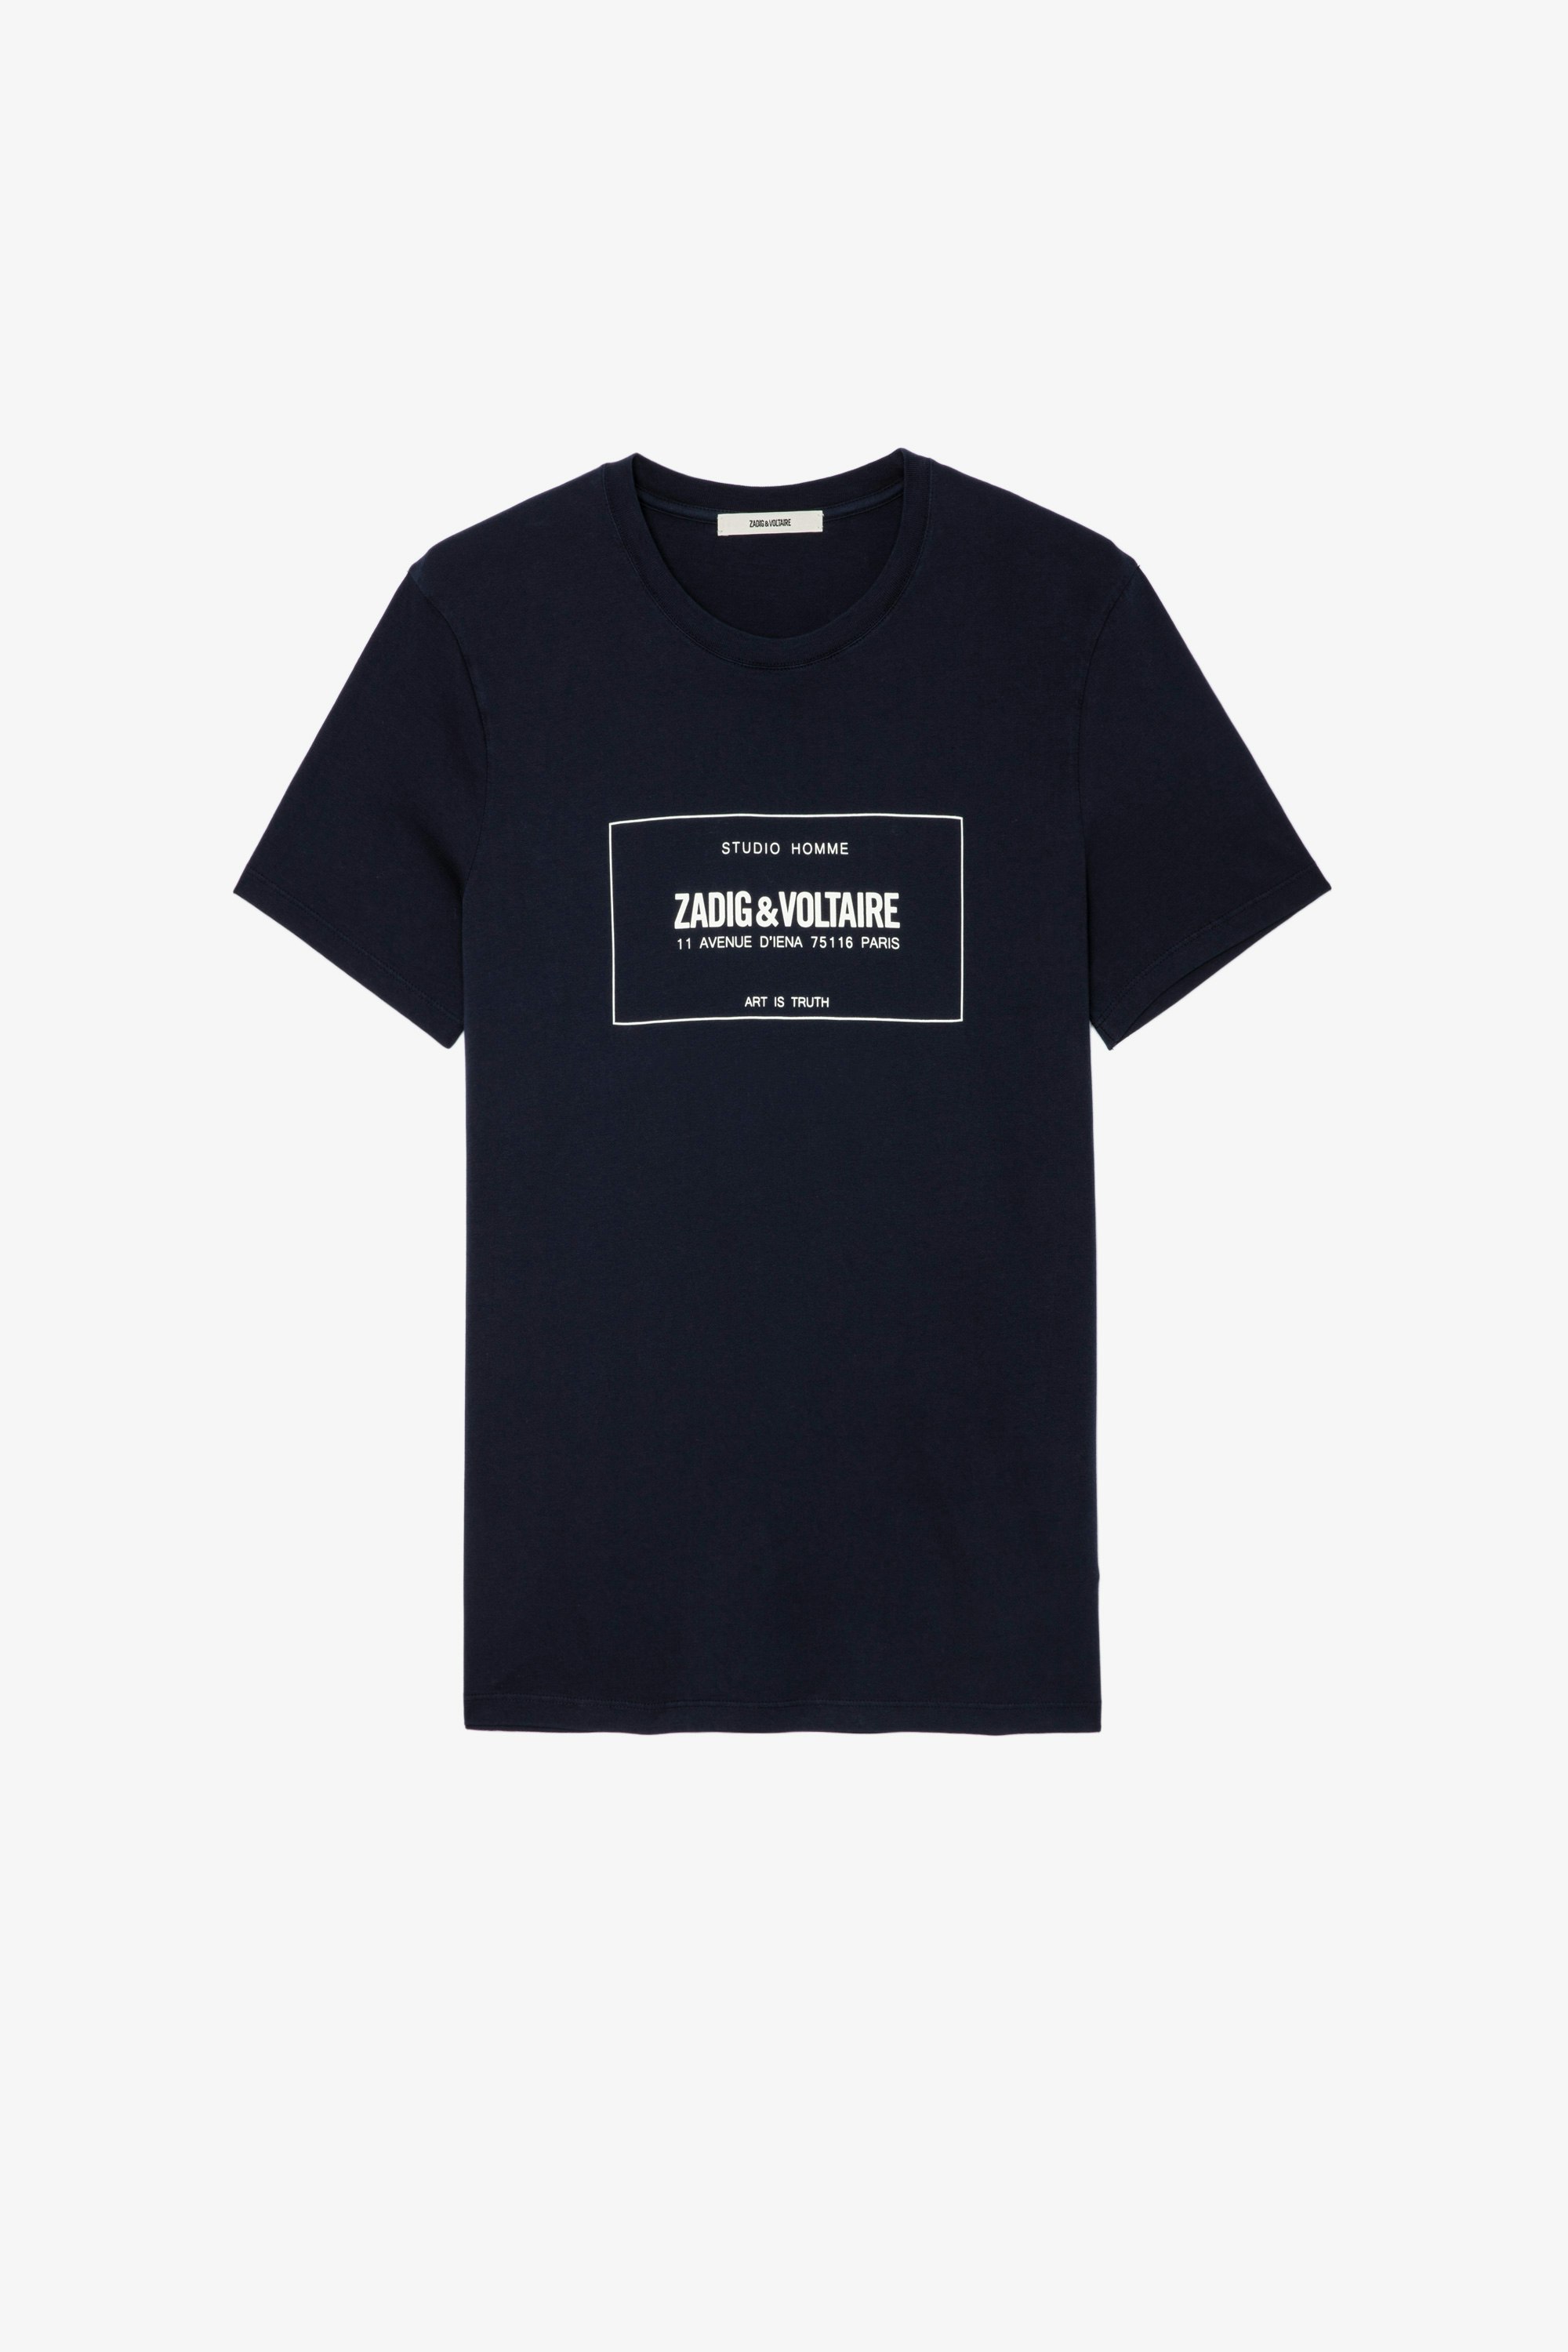 Ted Insignia T-Shirt Men’s navy-blue cotton T-shirt with the brand insignia